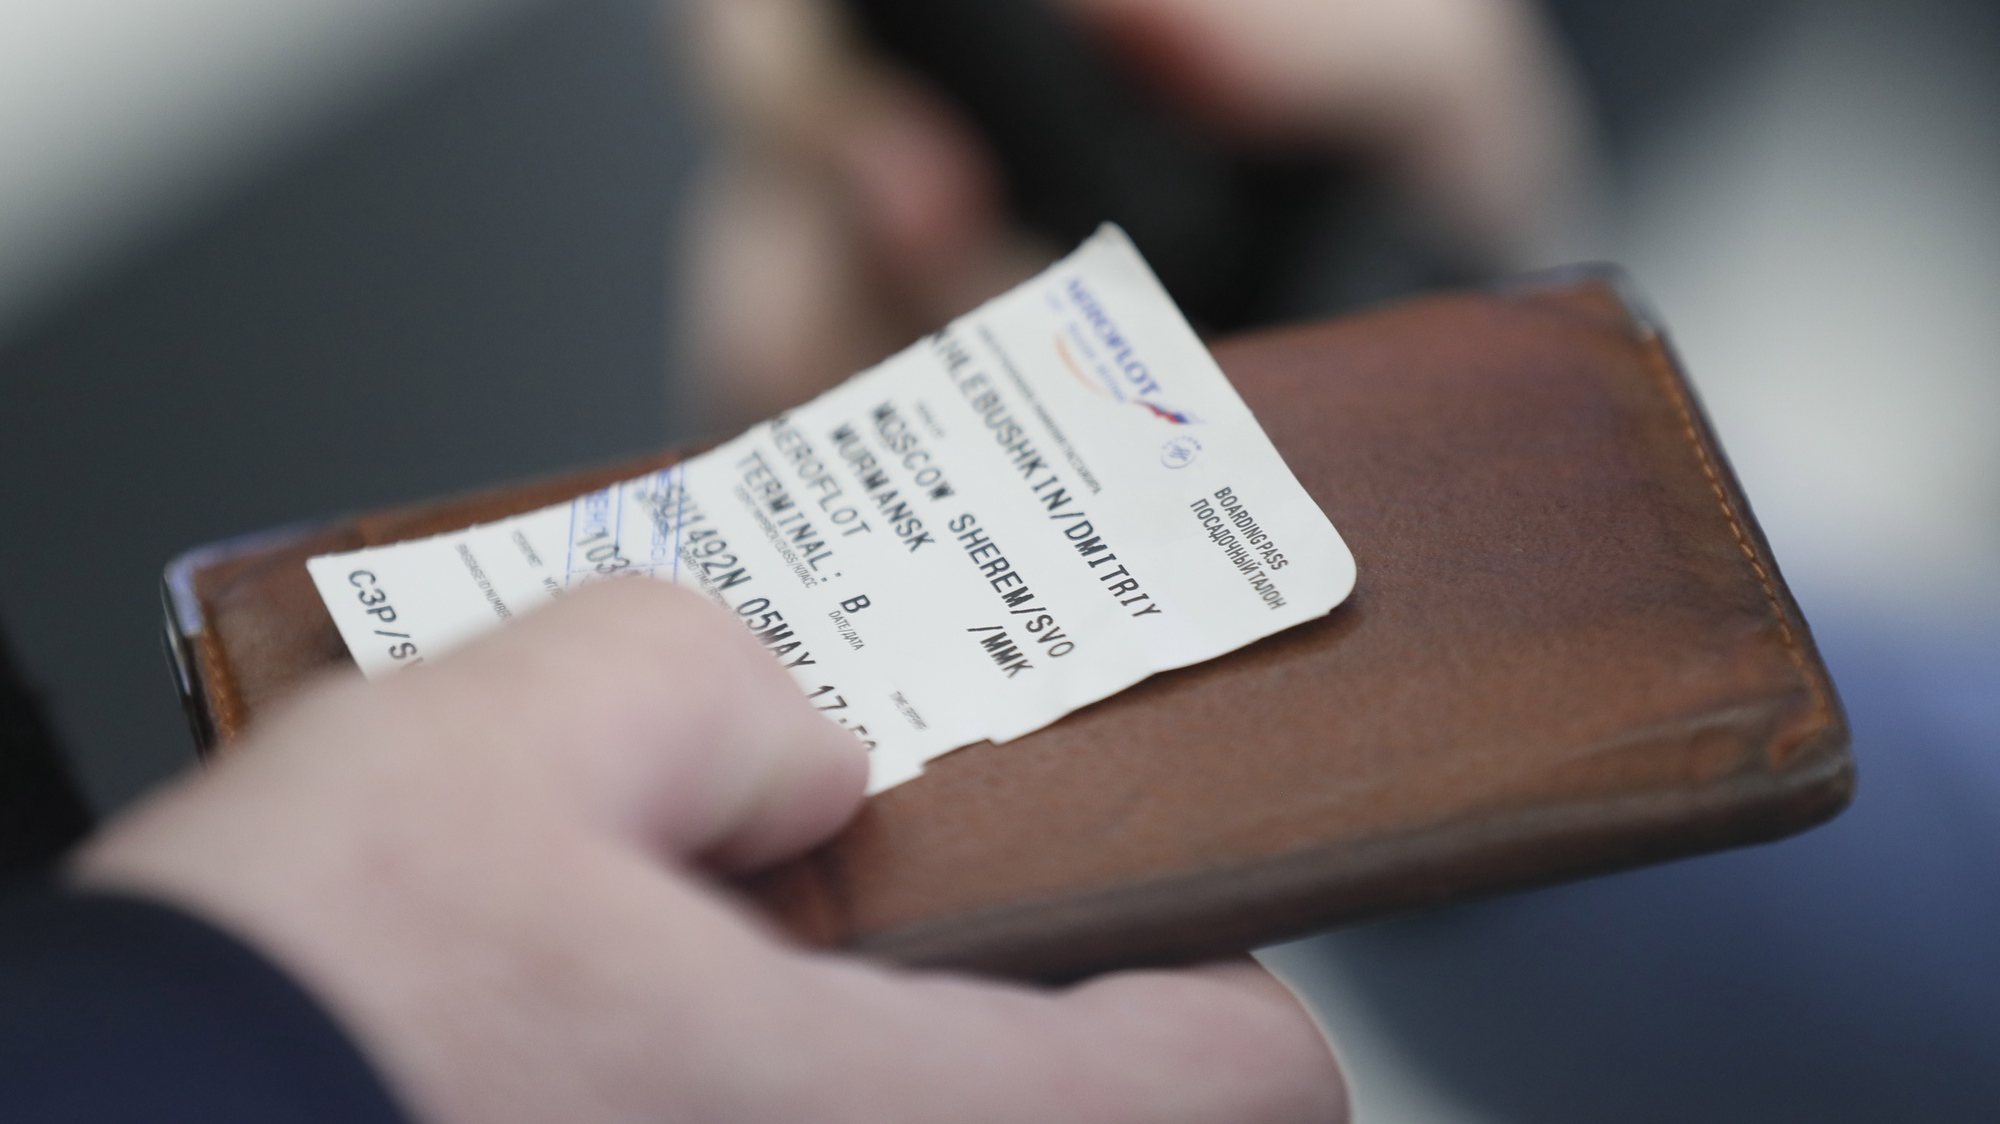 epa07549917 A passenger holds his passport and a boarding pass at Aeroflot&#039;s Sheremetyevo airport terminal, after the fire which emerged while the Sukhoi Superjet 100 of Russian airline Aeroflot plane crashlanded was put out at Moscow&#039;s Sheremetyevo airport, Russia, 05 May 2019. According to authorities, at least 13 people died after the plane had to make an emergency landing just after take off for the flight to Murmansk.  EPA/SERGEI ILNITSKY